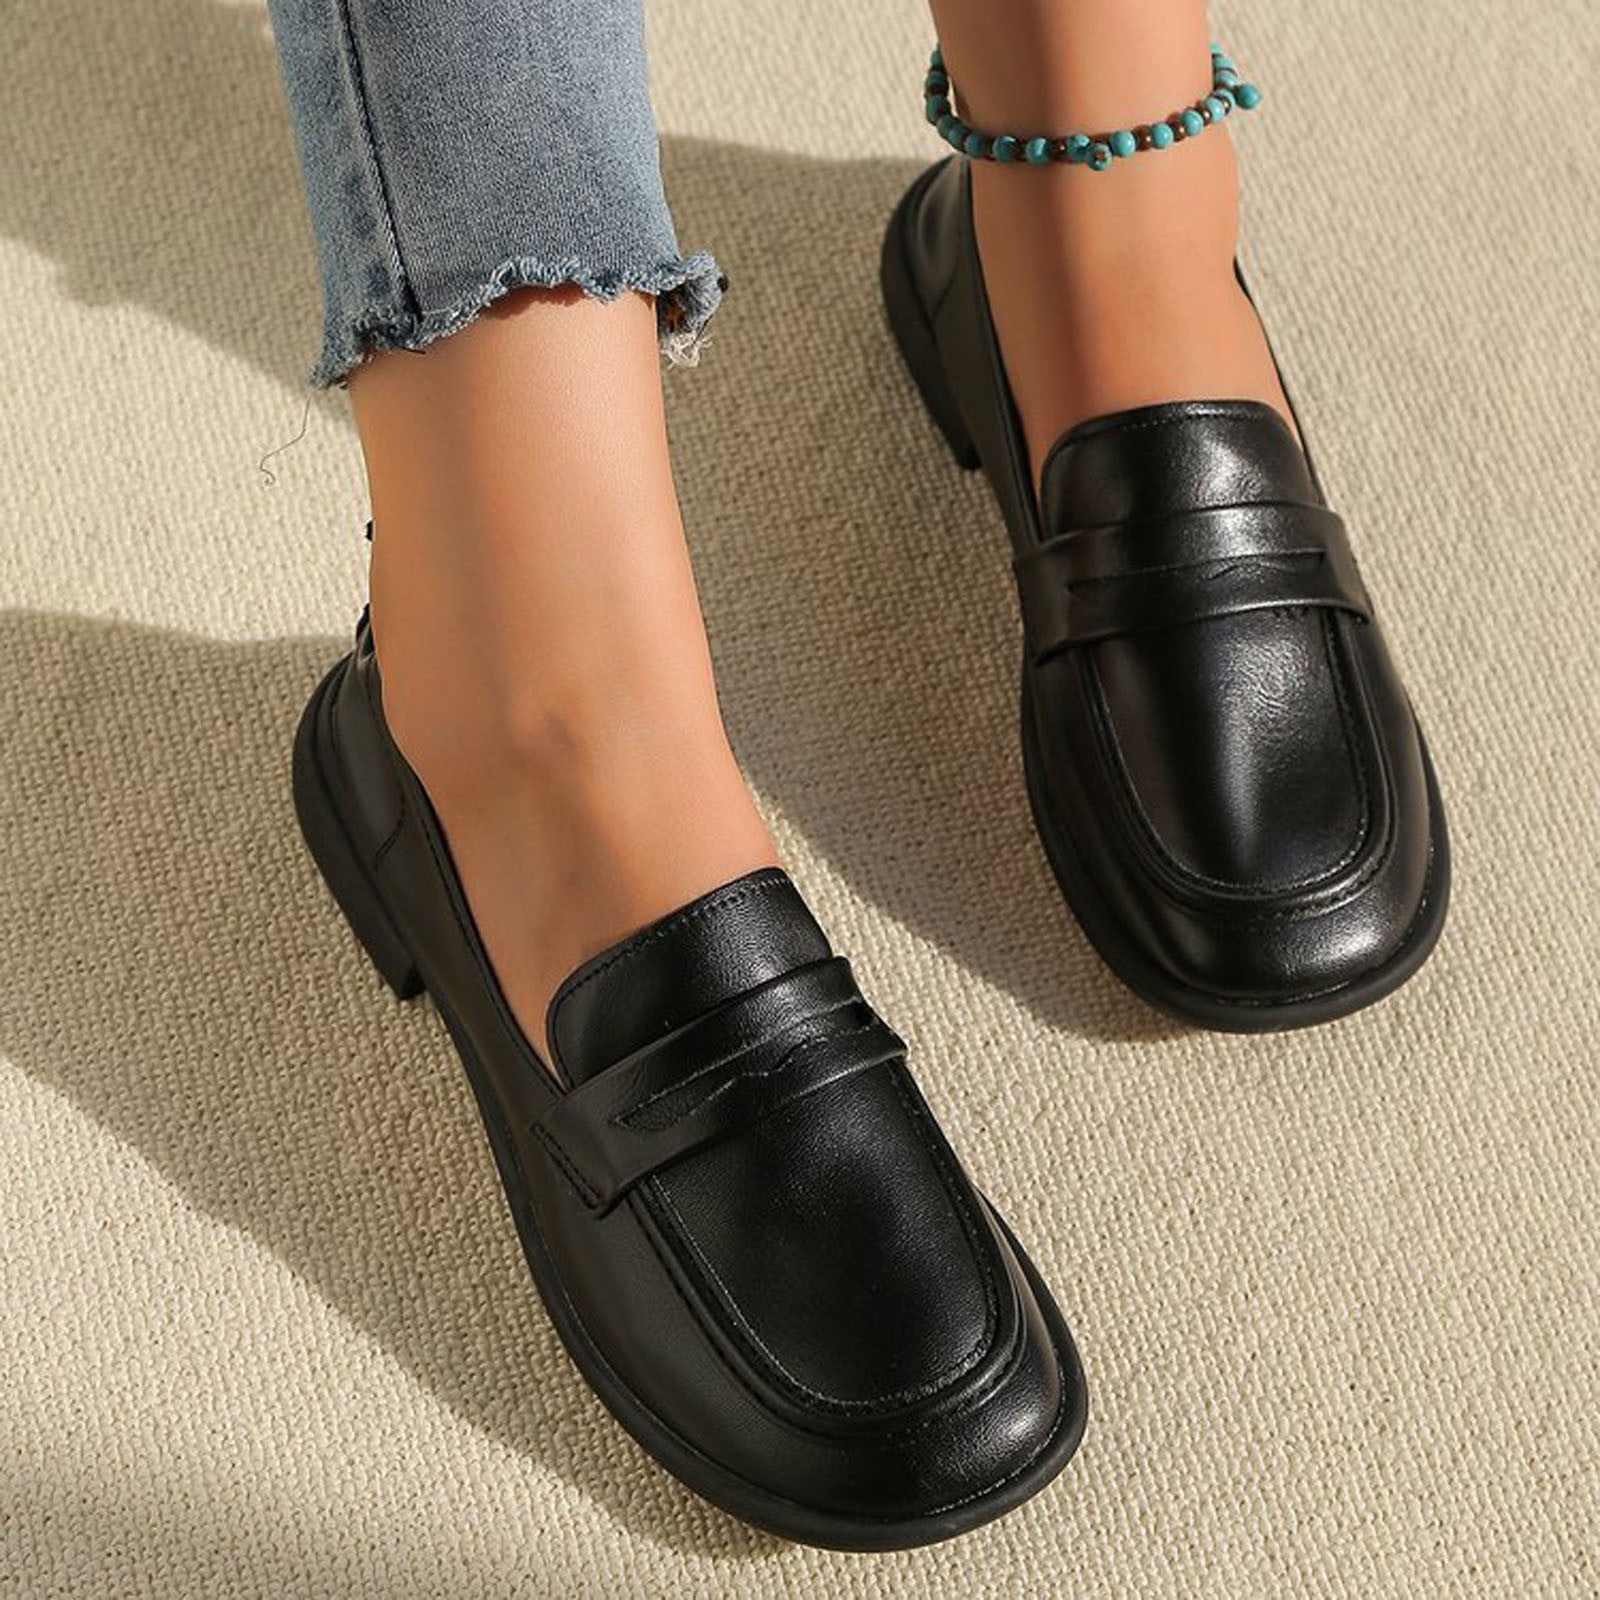 Dressy Casual Shoes Slip On Loafers for Womens Leather Comfort Memory Foam Dress Shoes,Black 7.5 - Walmart.com